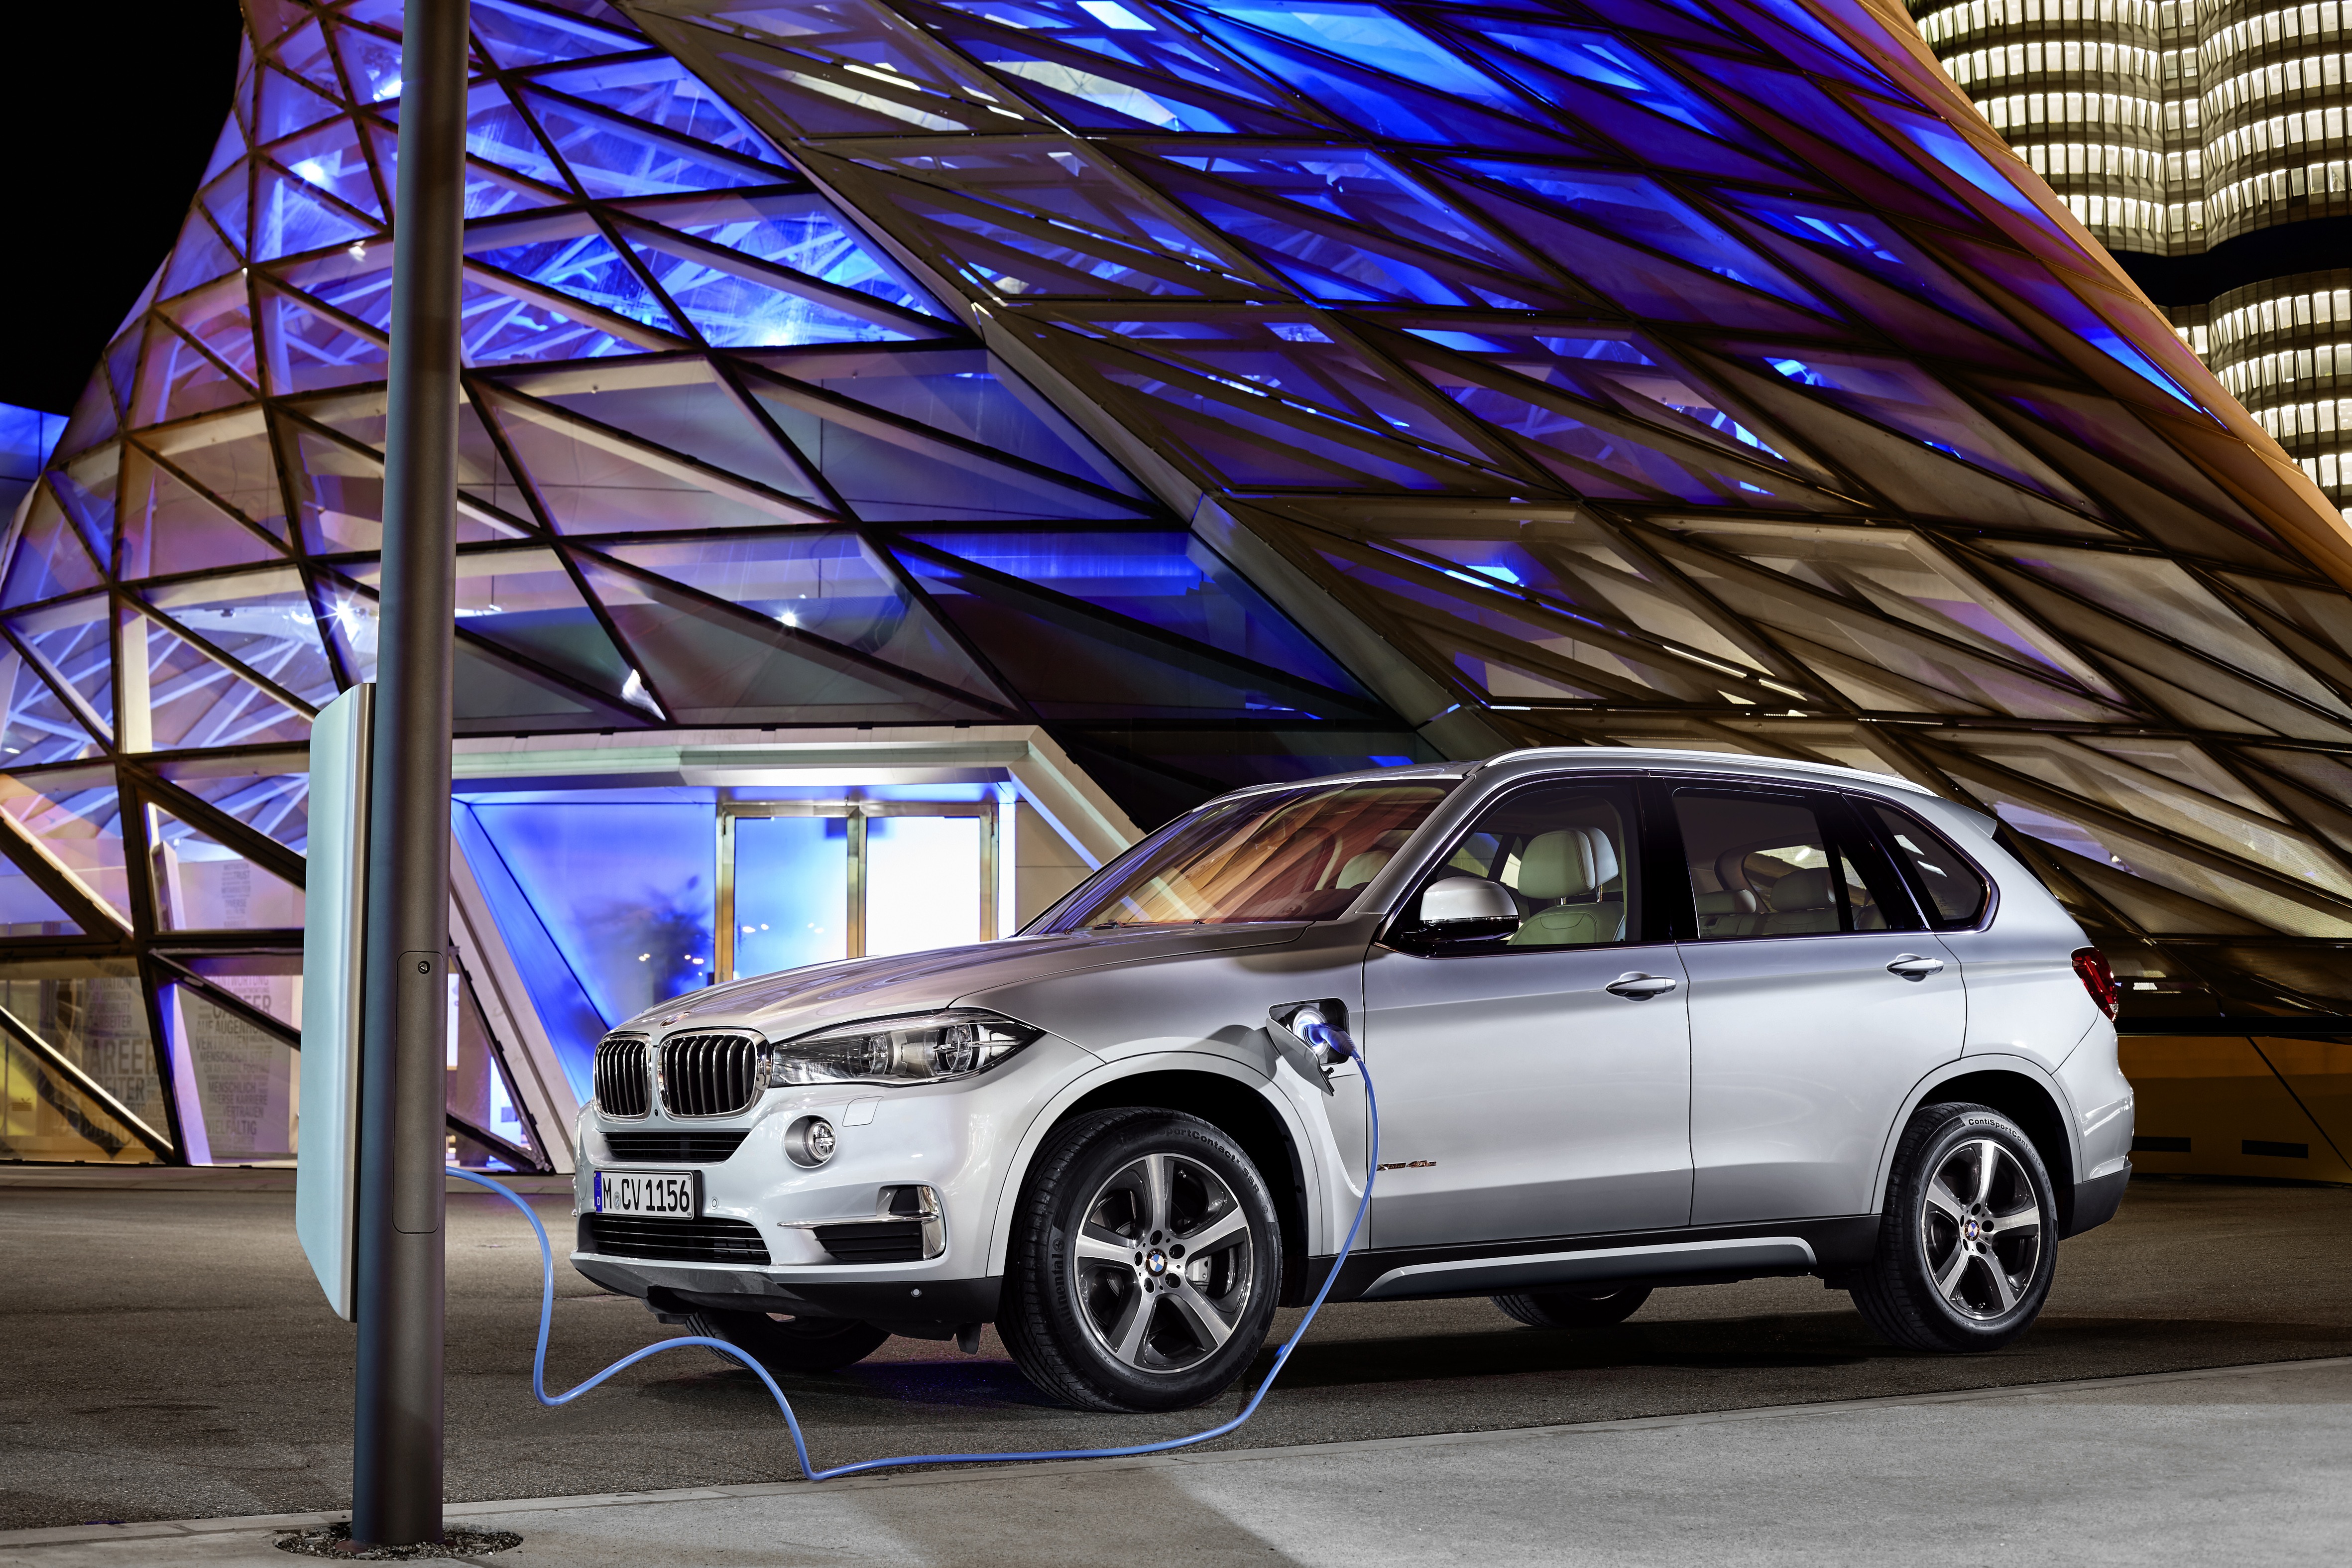 BMW X5 xDrive40e Confirmed for Shanghai Motor Show 2015, Other High-End Models Follow